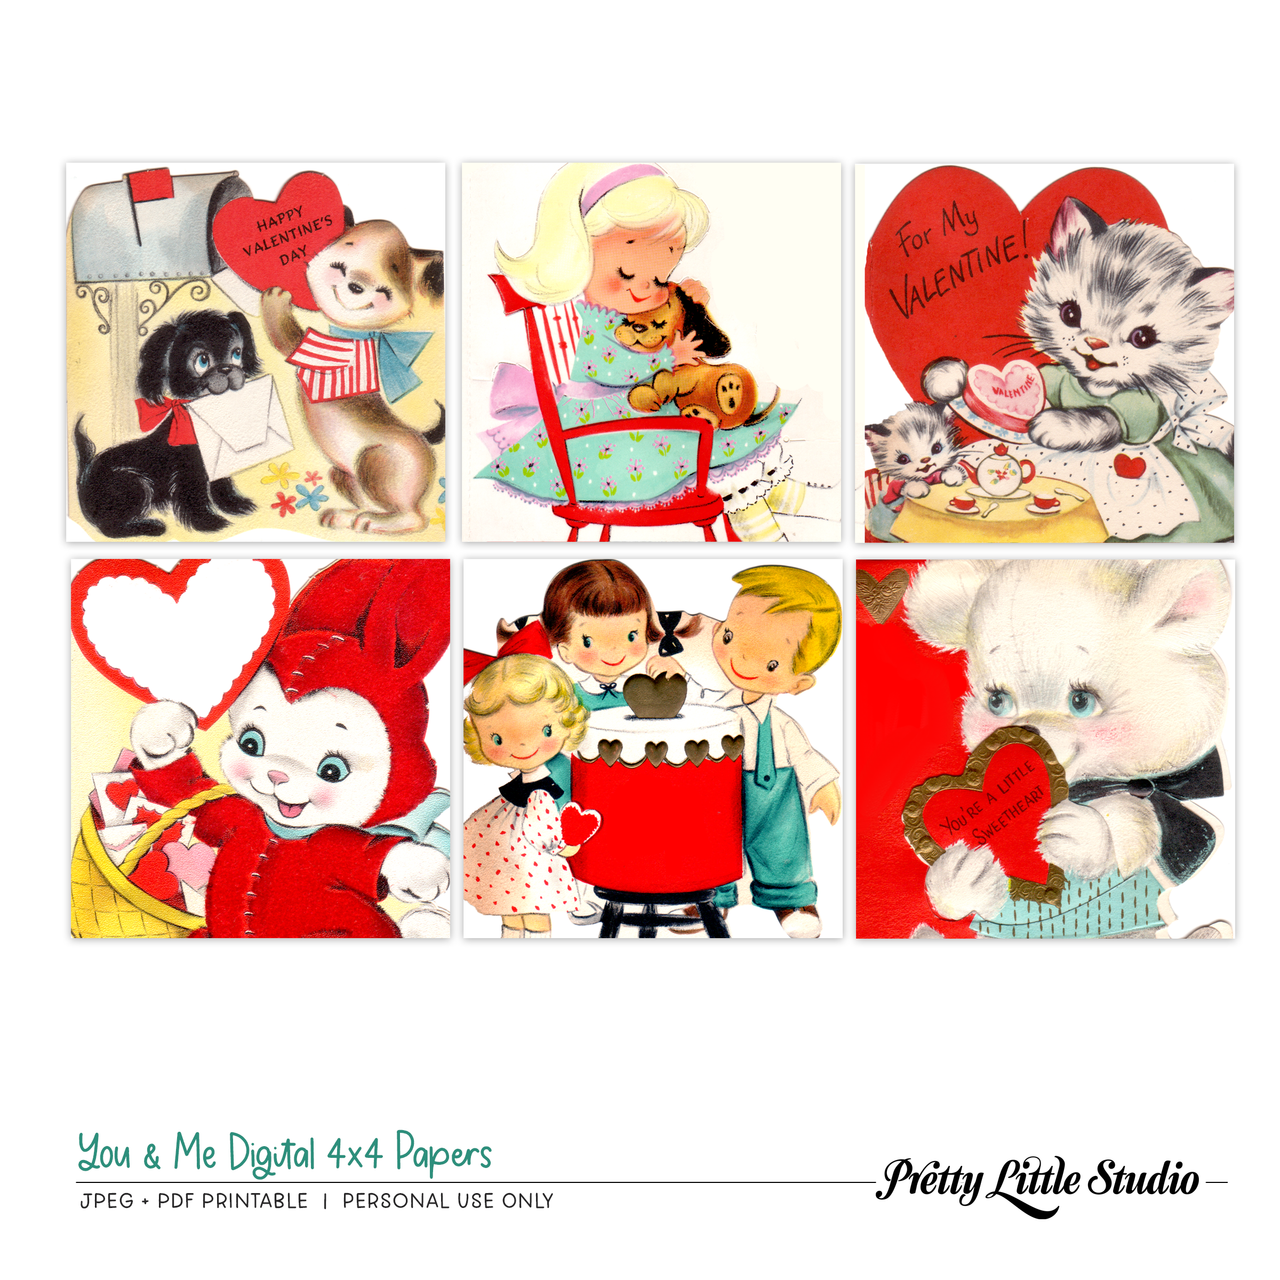 Digital  You & Me 4x4 Patterned Papers - Pretty Little Studio